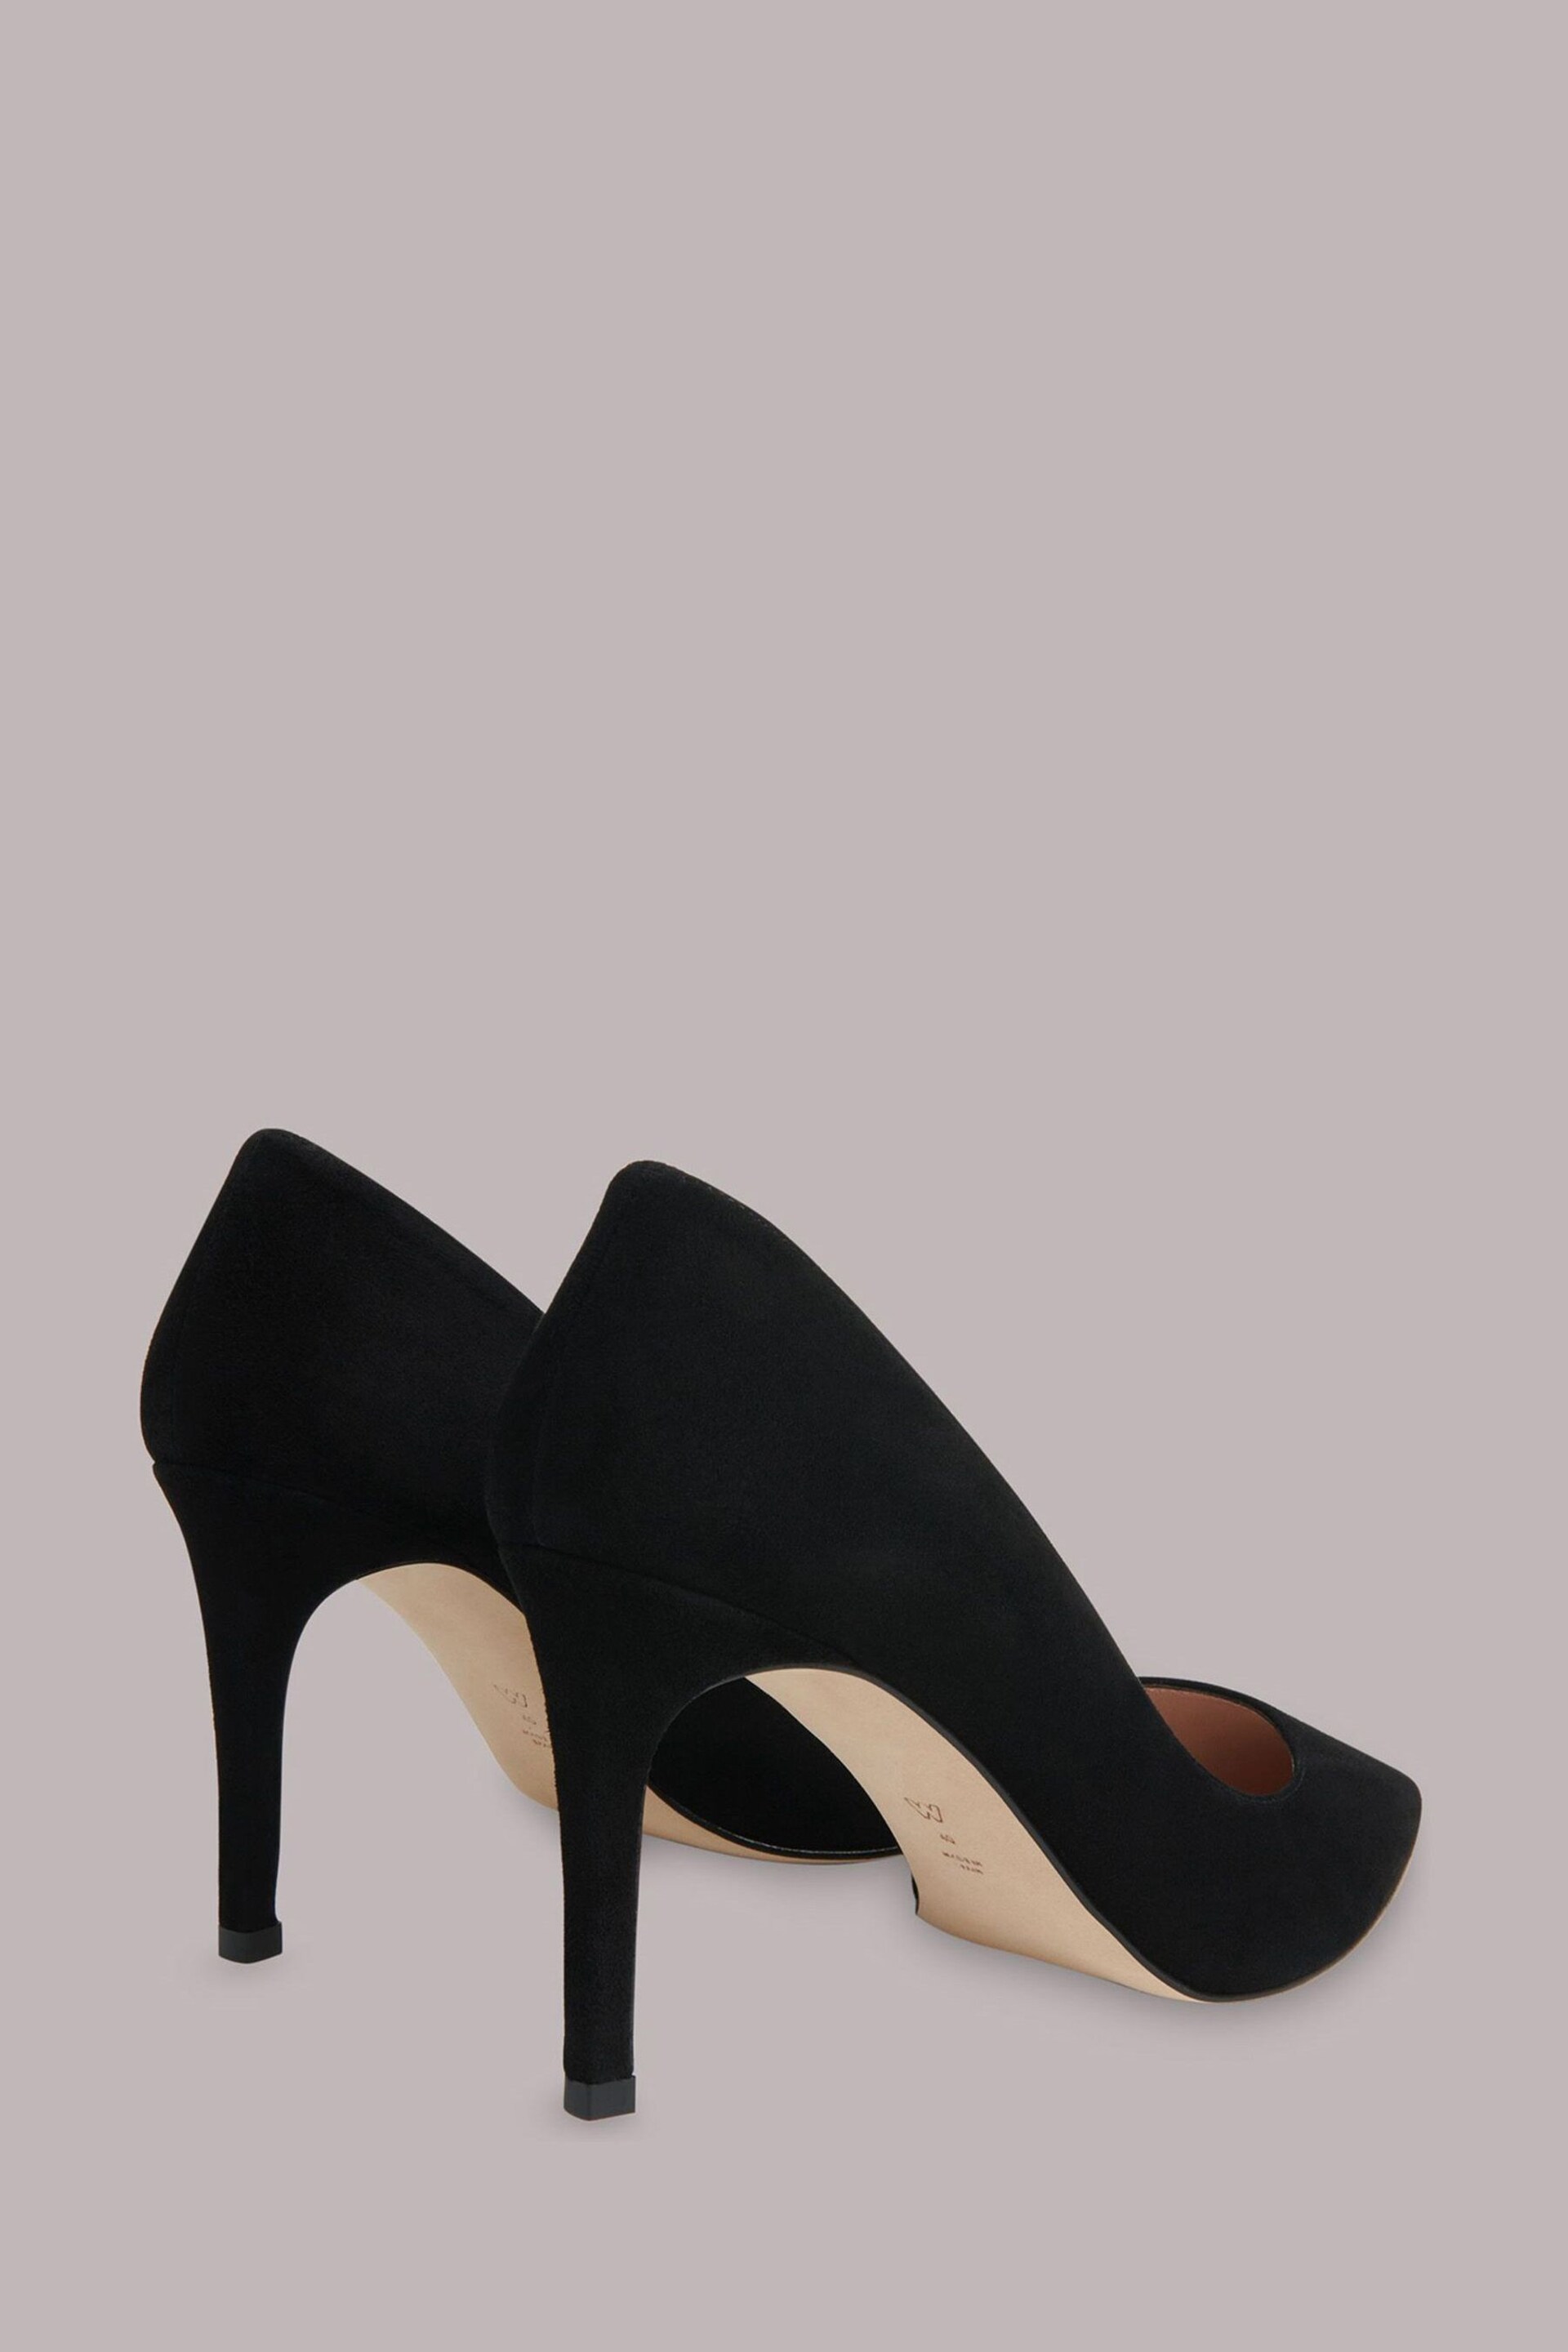 Whistles Corie Suede Black Heeled Pumps - Image 2 of 4